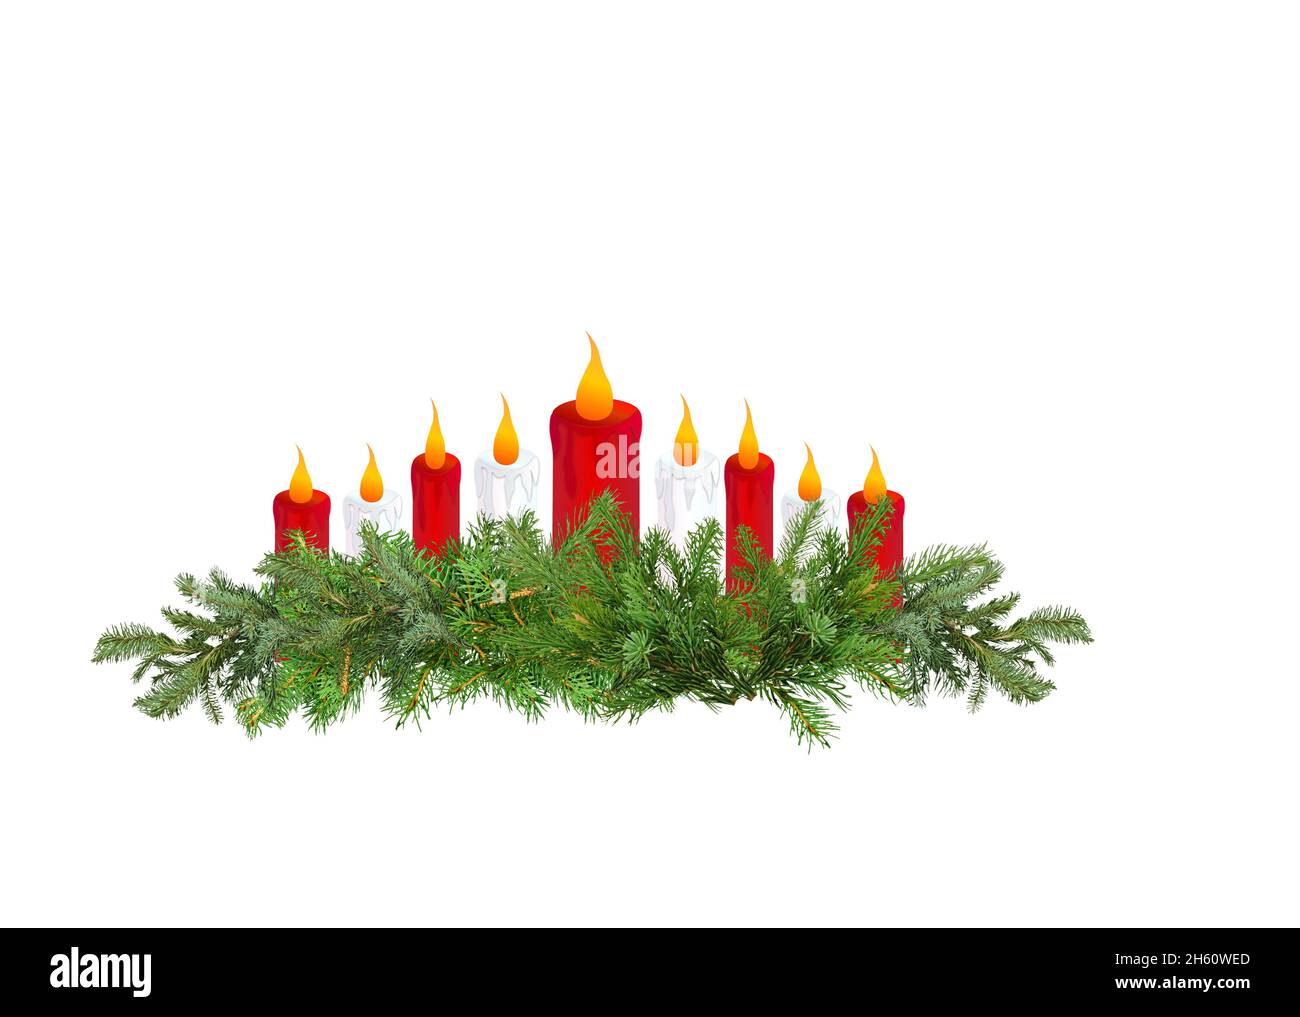 Christmas Red and white graphic candles lit and pine branches surrounding them.  Centerpiece Stock Photo